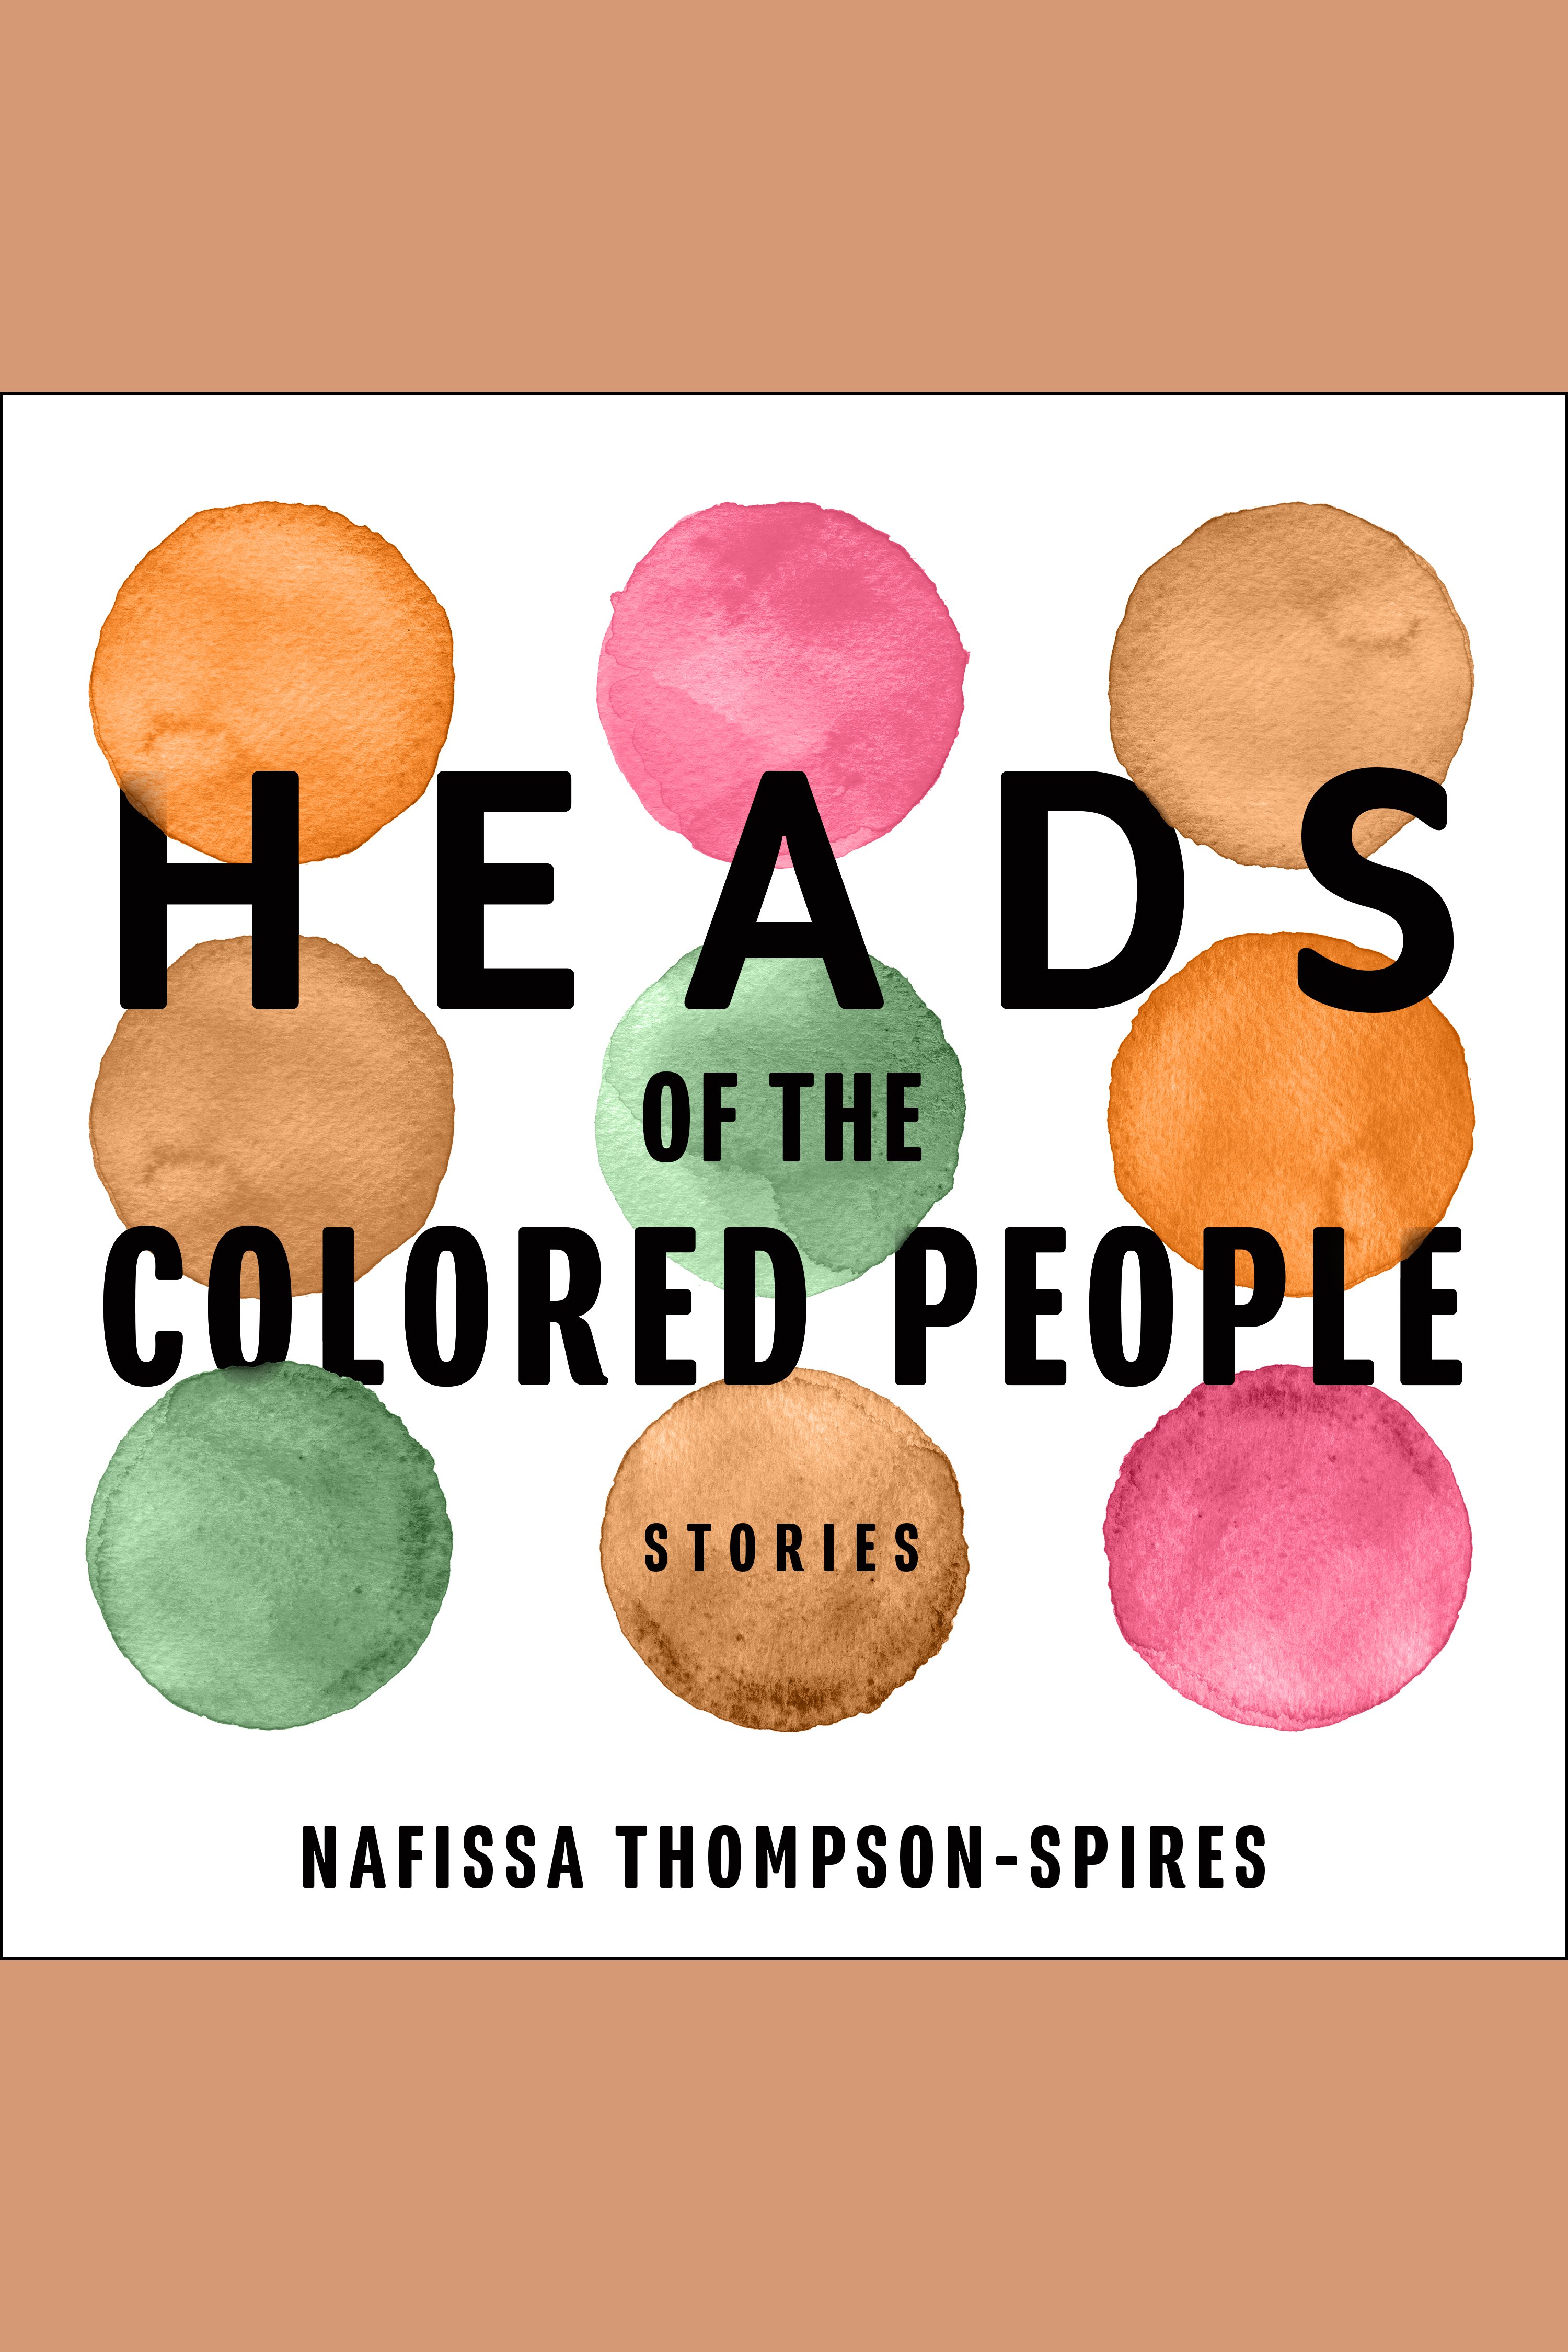 Heads of the colored people stories cover image